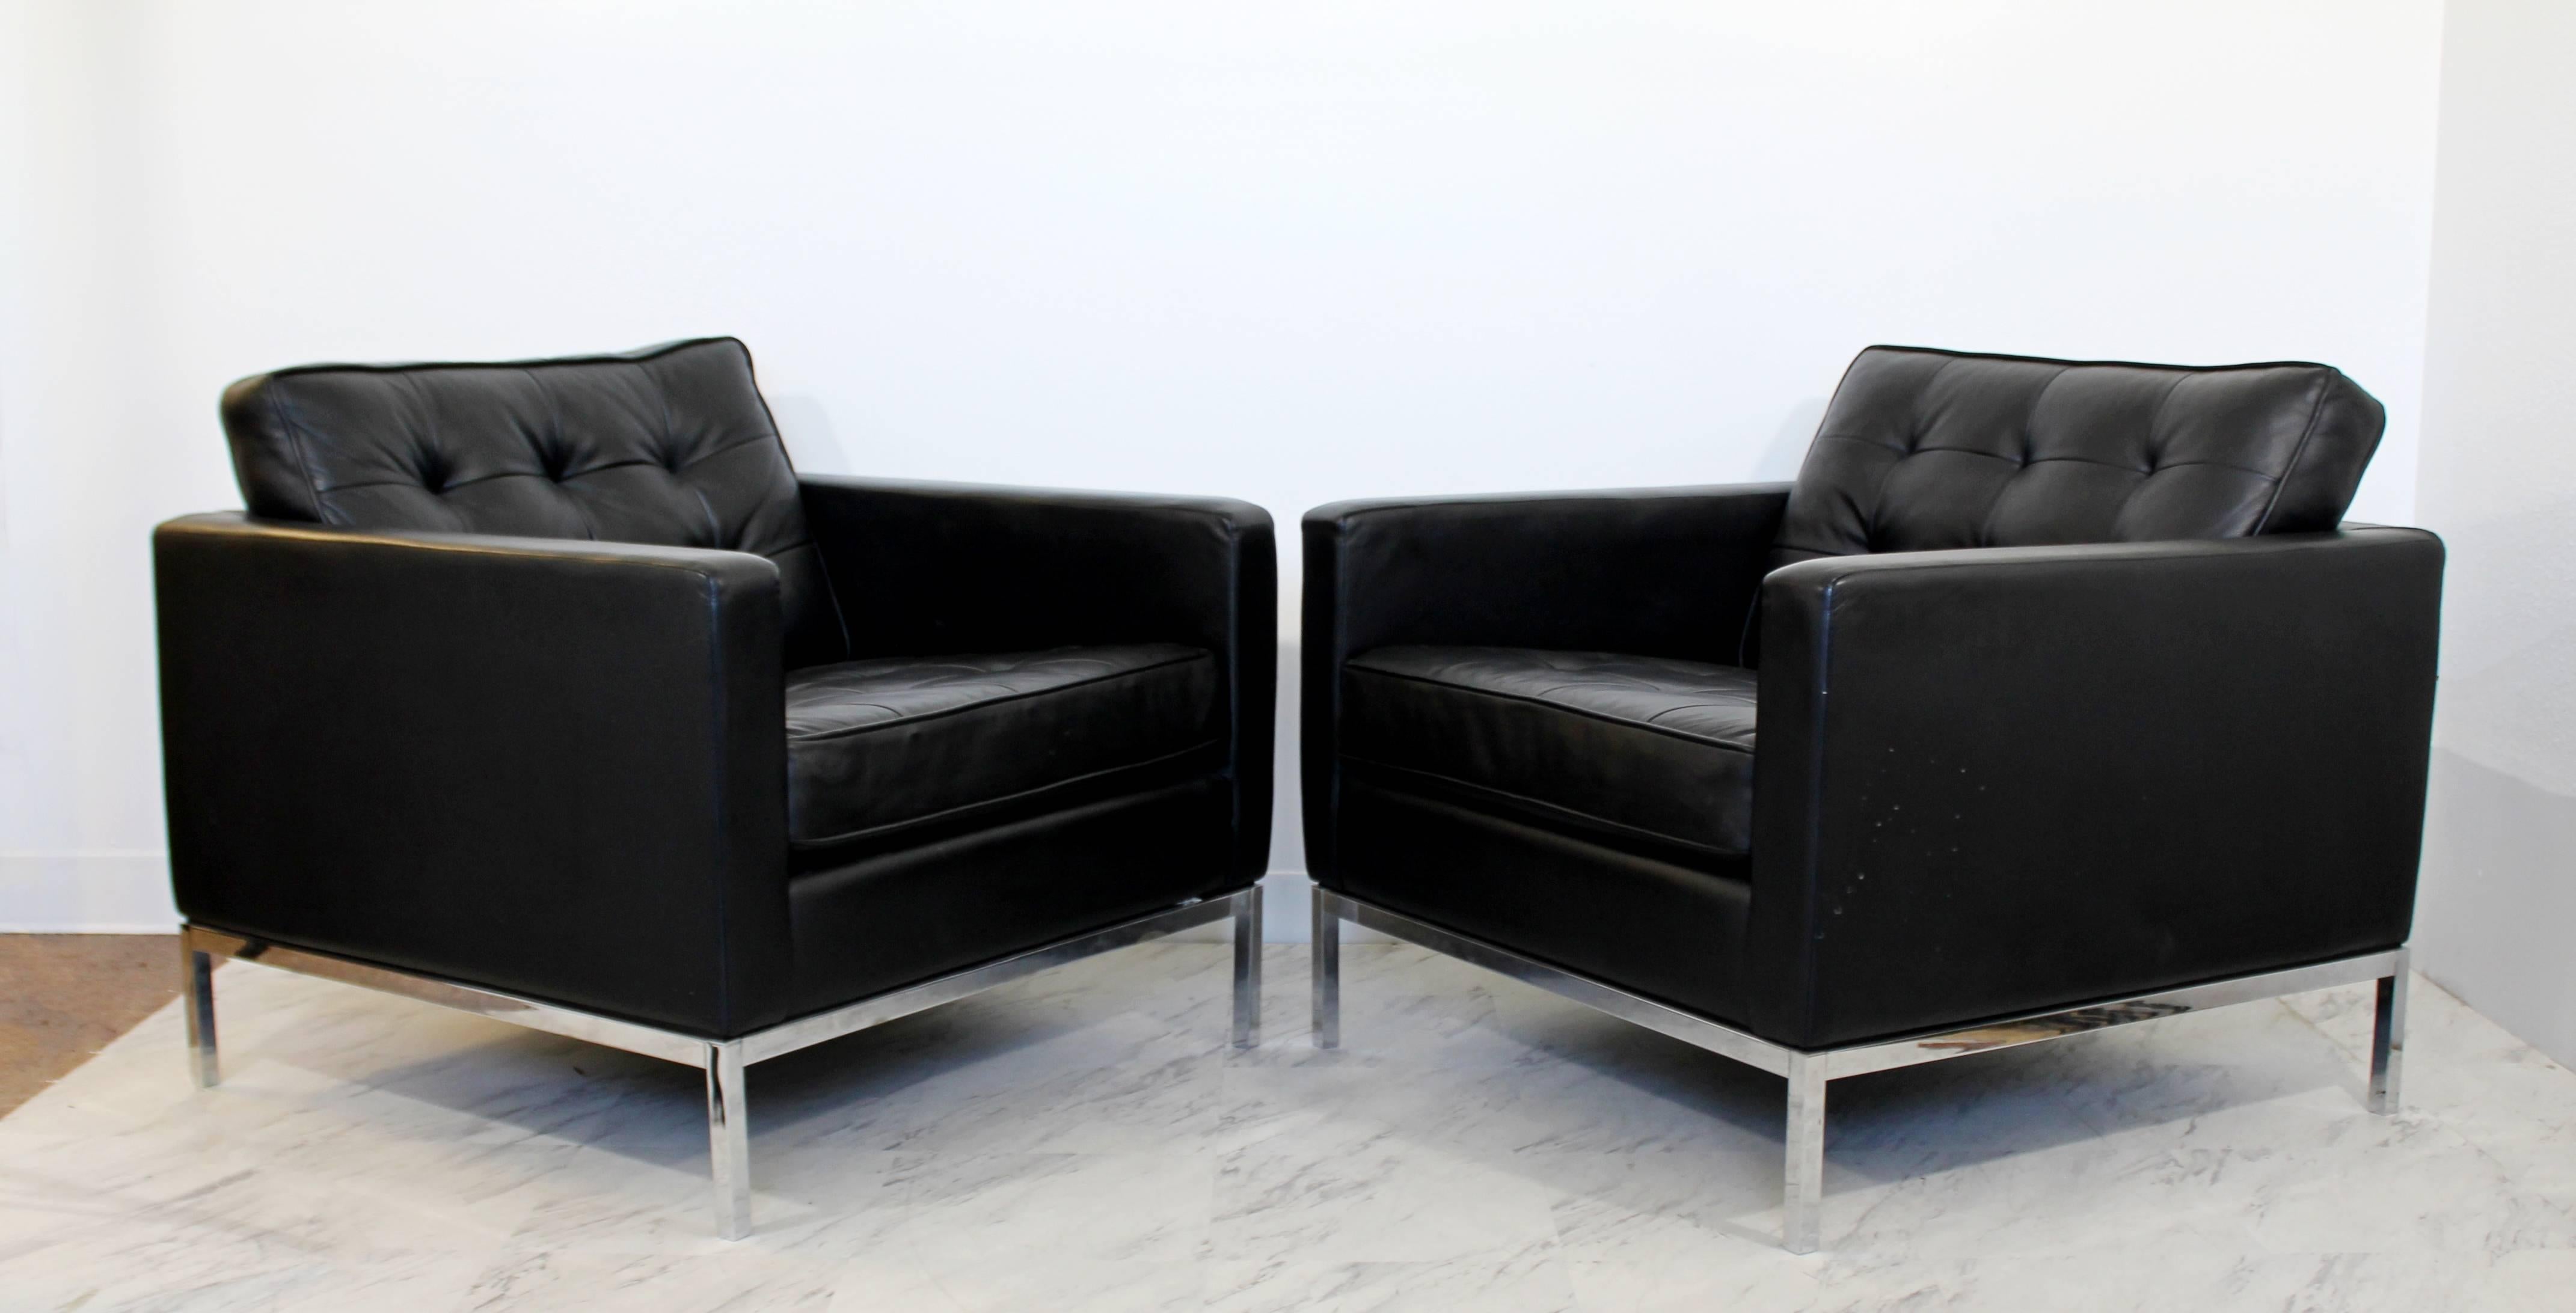 American Mid-Century Modern Pair of Knoll Black Leather Chrome Tufted Cube Lounge Chairs